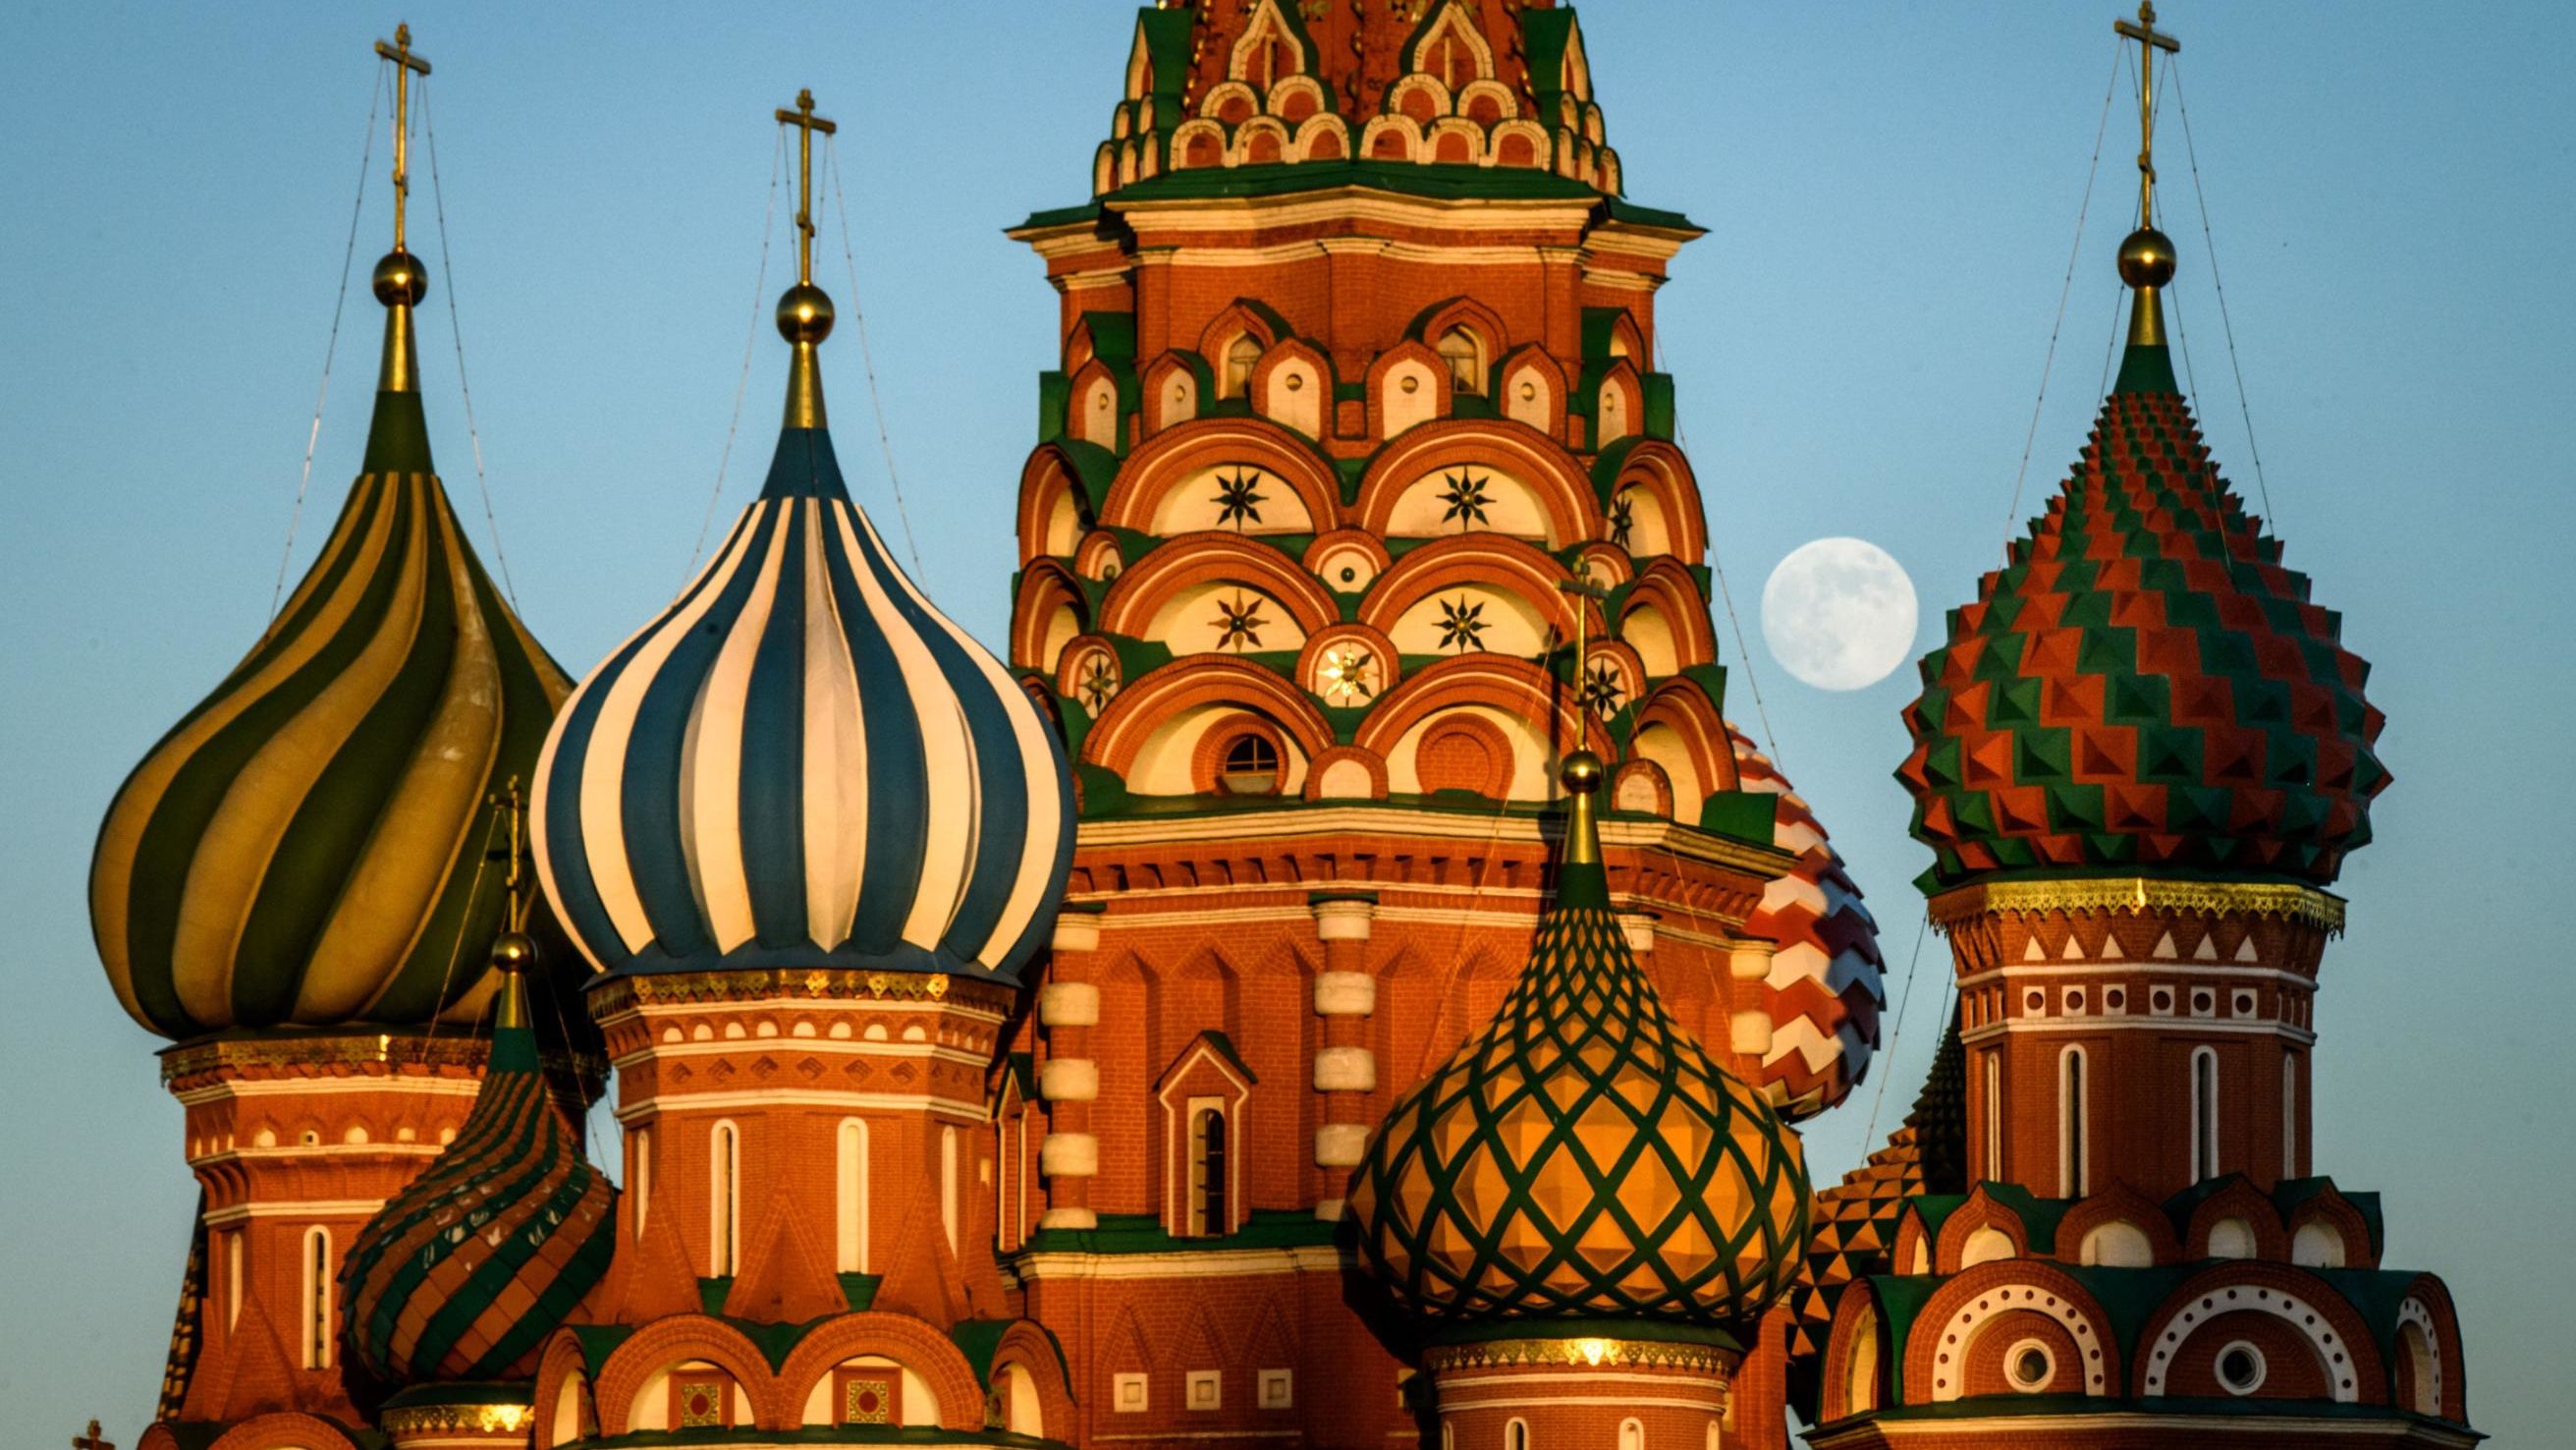 Saint mysterious origins of Moscow's multicolored cathedral | CNN